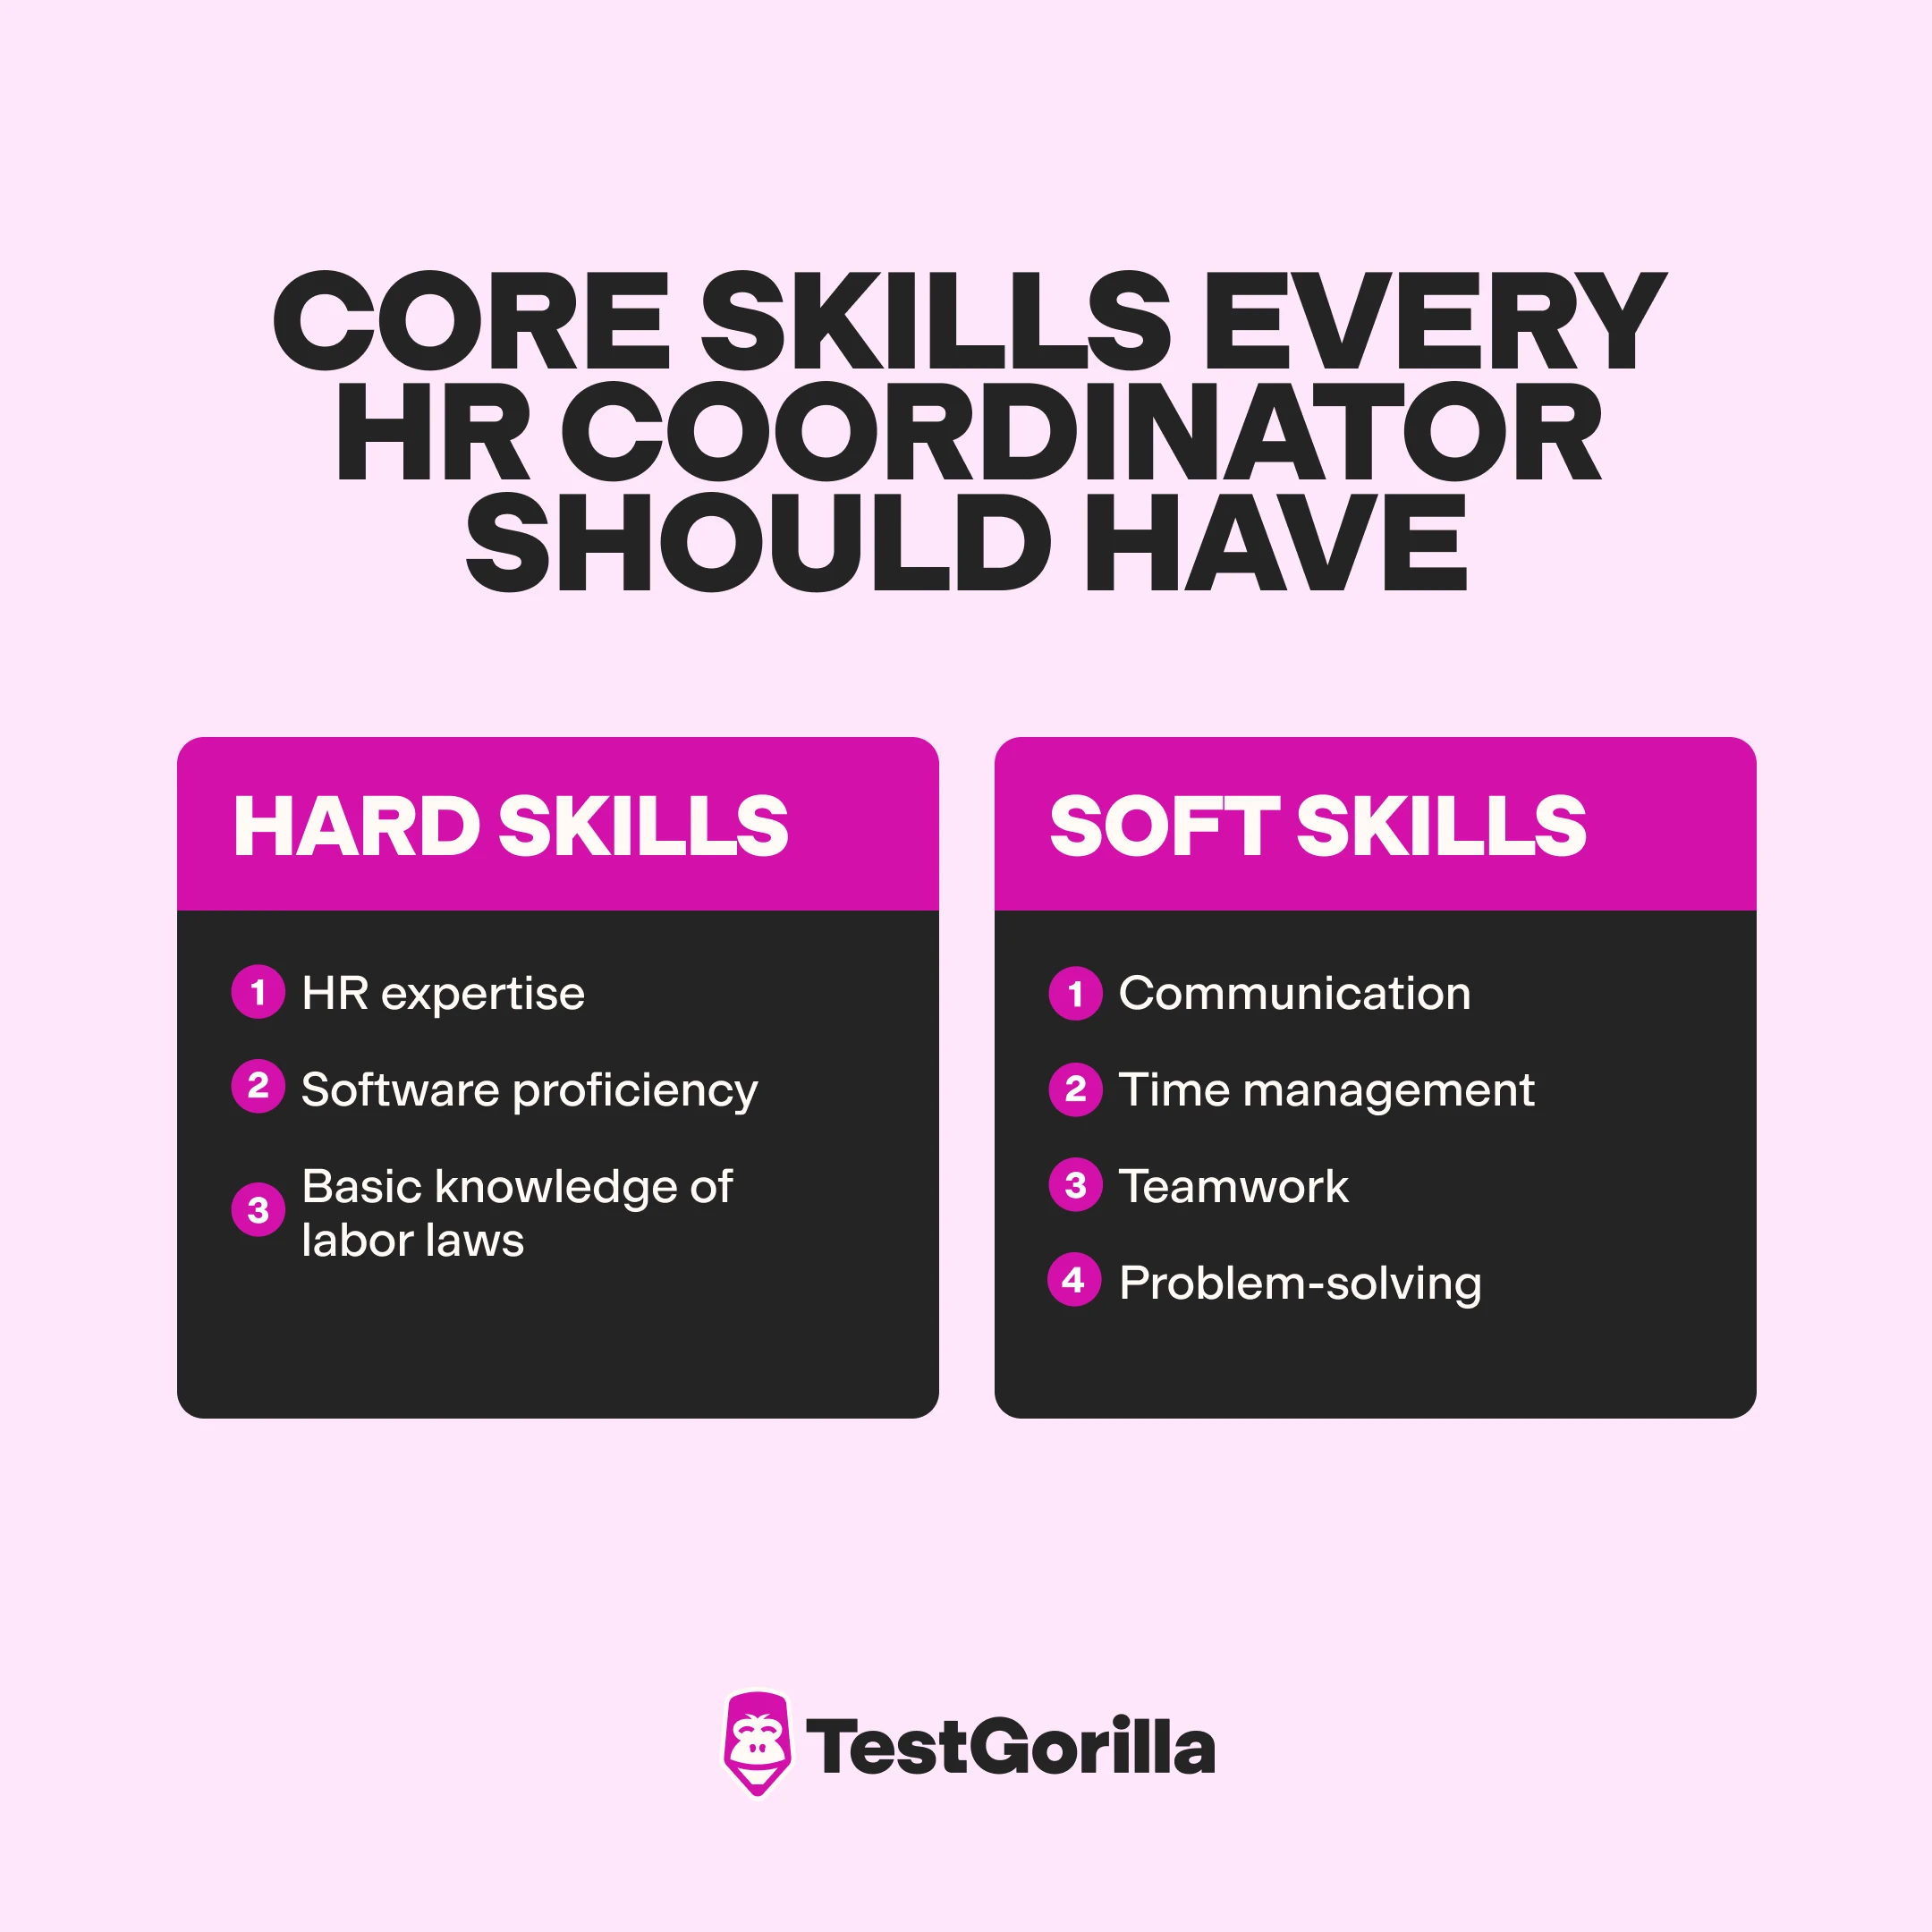 Core-skills-every-HR-coordinator-should-have (1)